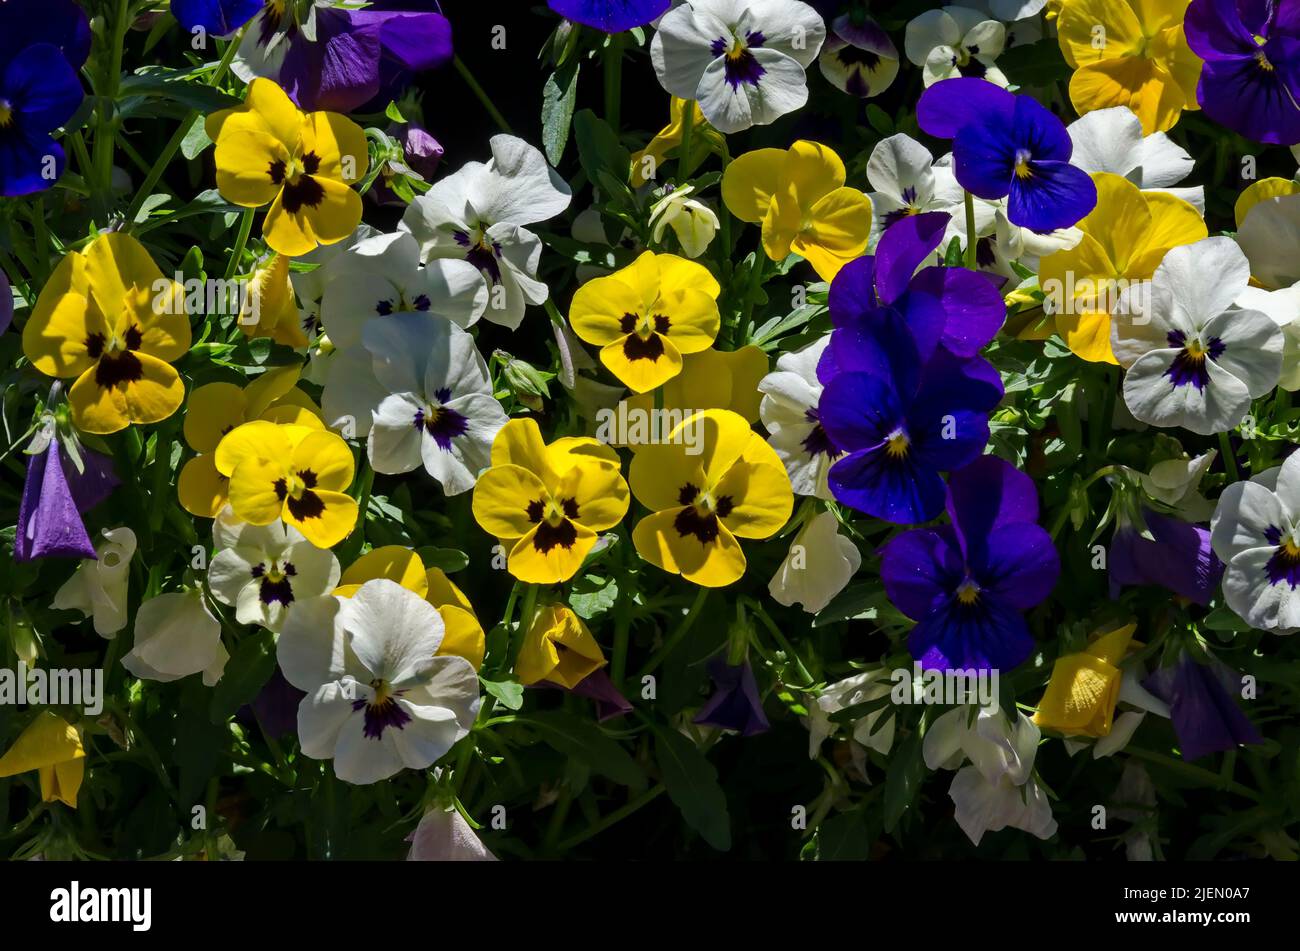 Mixture of purple, yellow, pink and white violets, Altai violet or purple flower, Sofia, Bulgaria Stock Photo